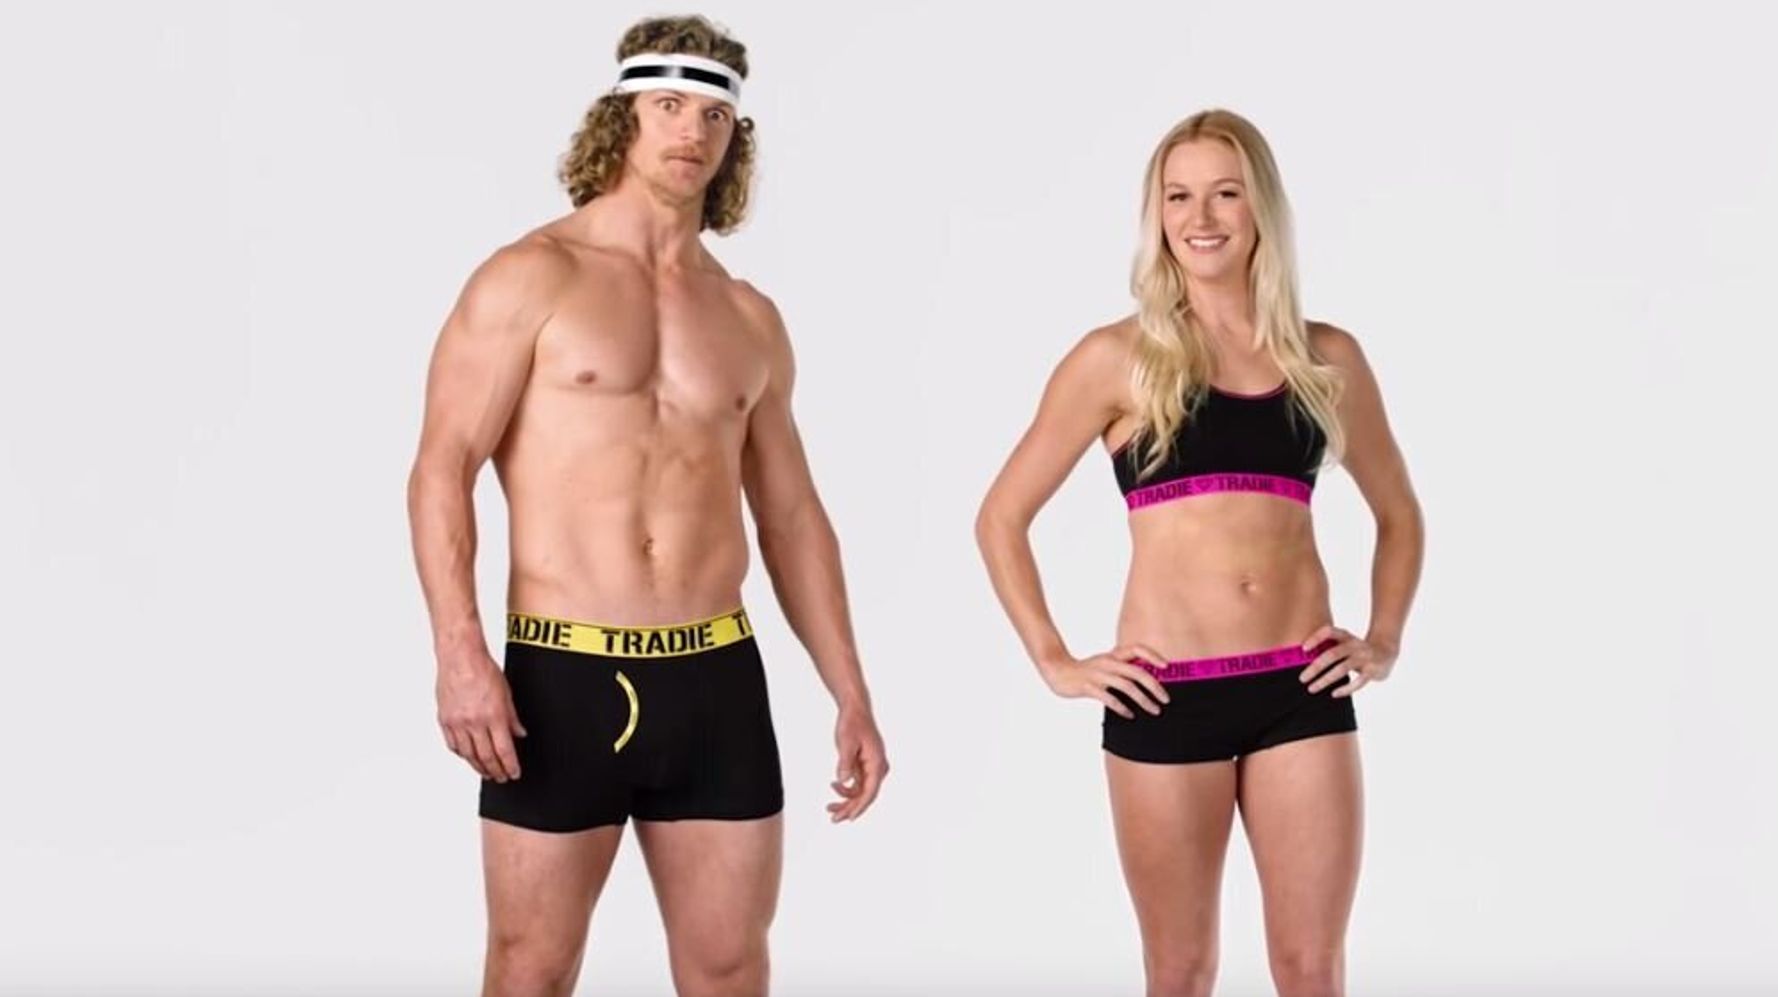 We Asked This Sassy Ski Champ To Translate Her Cheeky Undies Ad Monologue